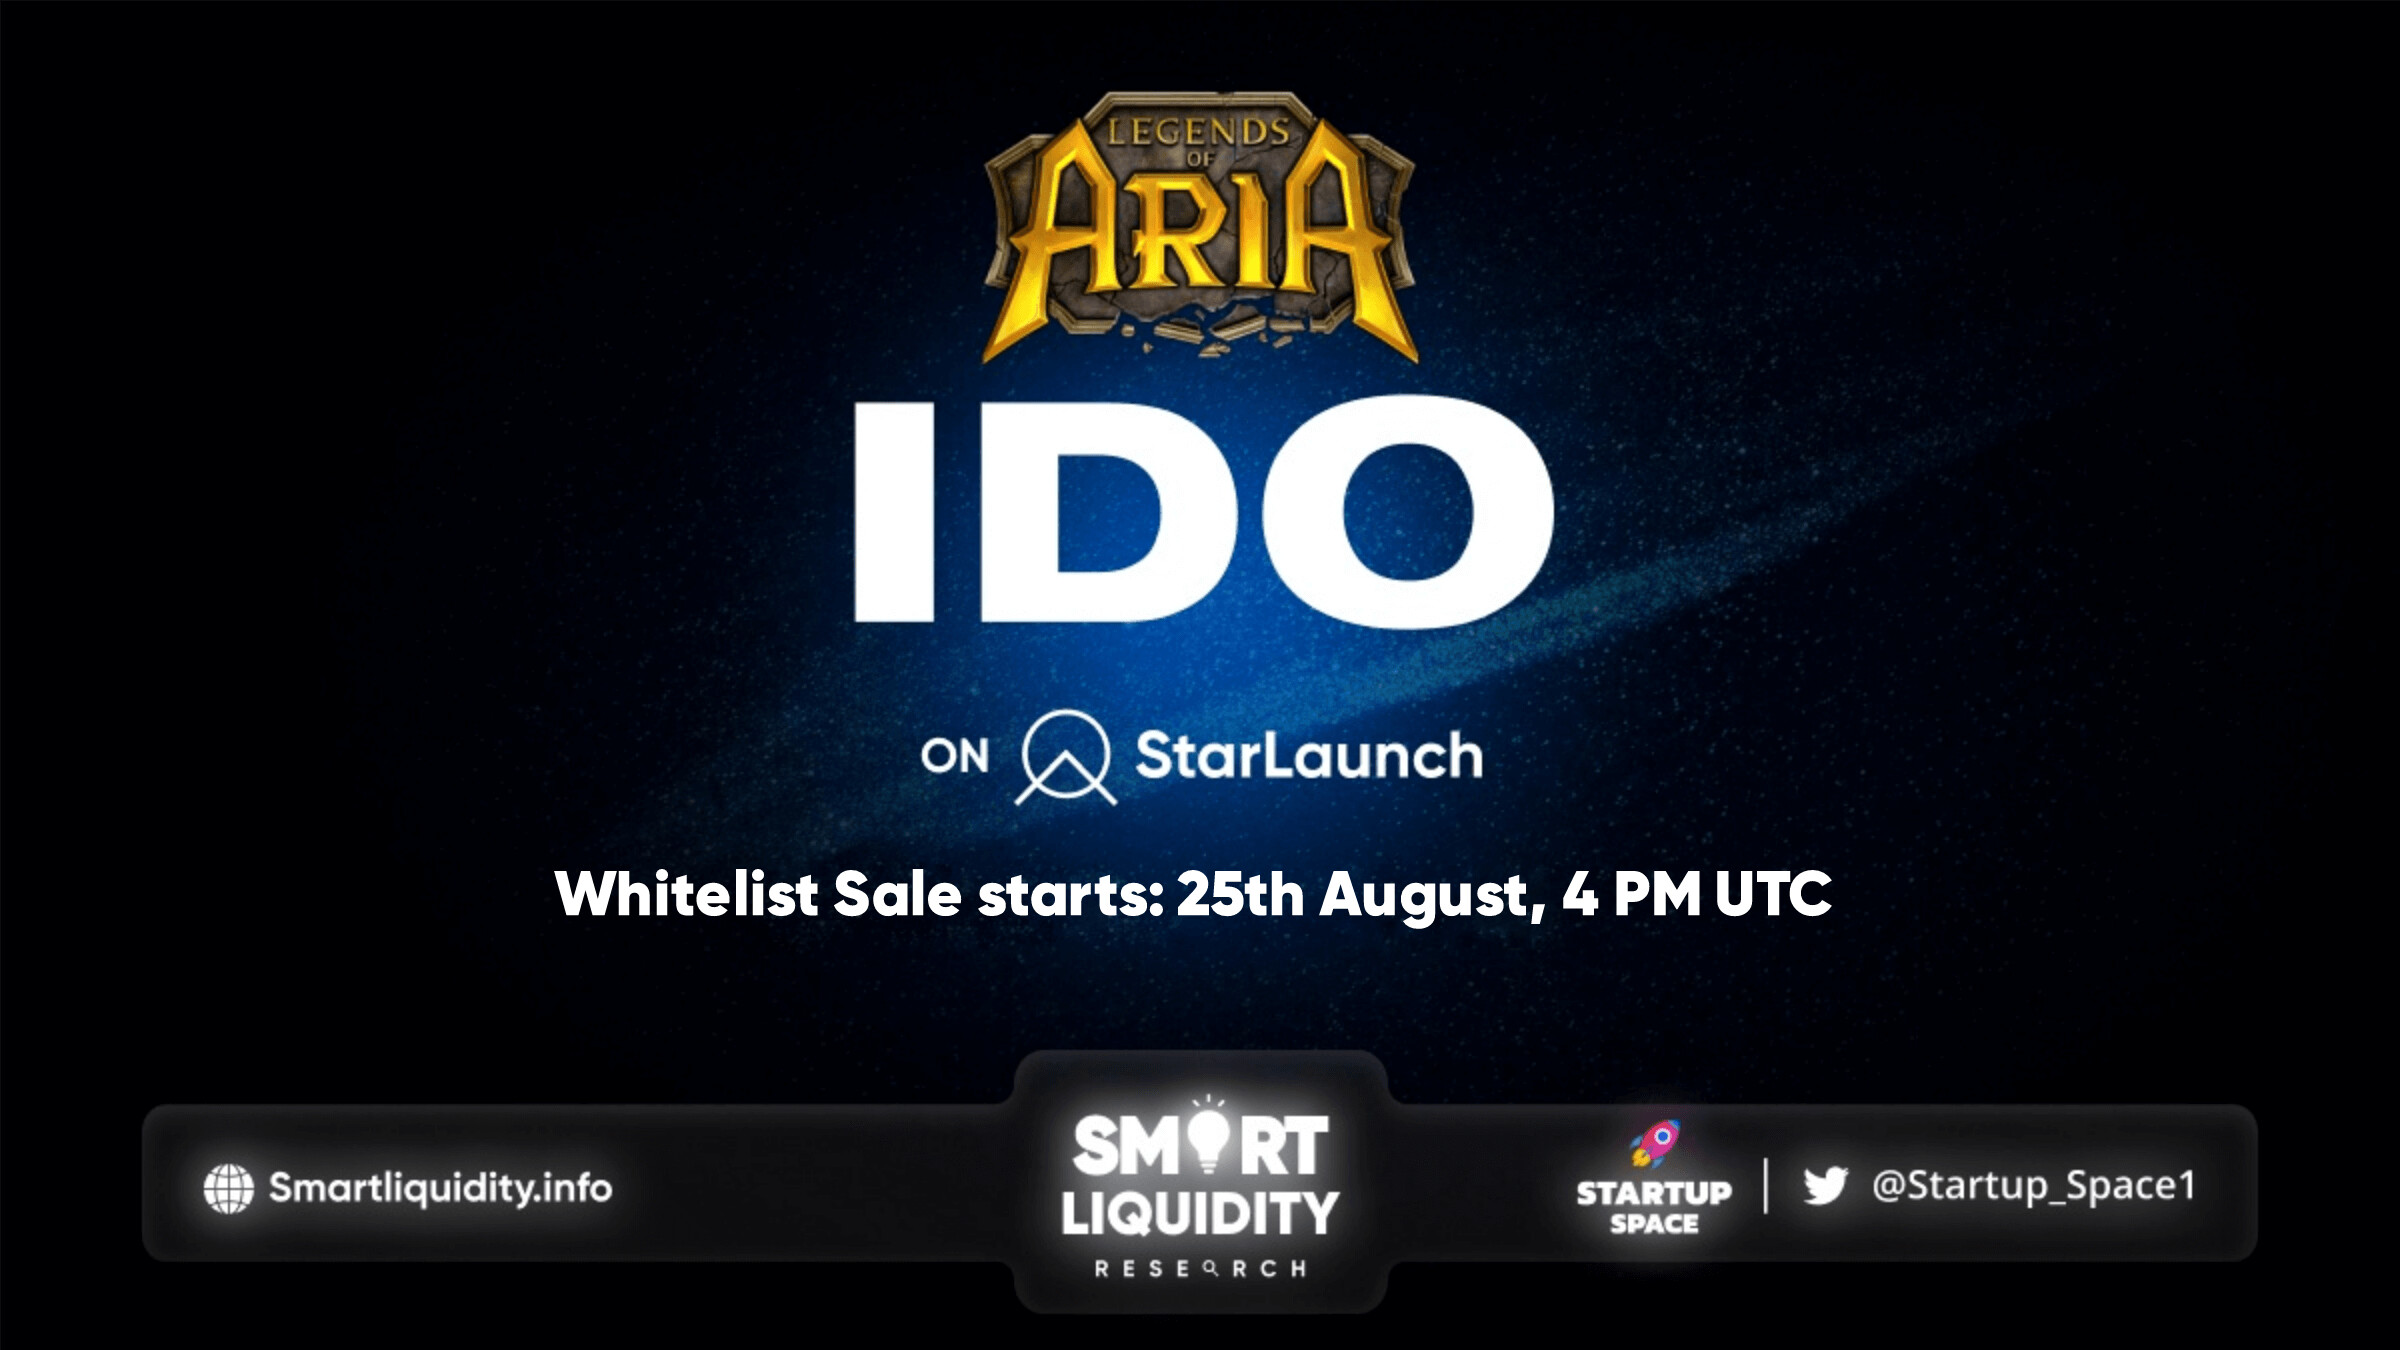 Legends of Aria Upcoming IDO on StarLaunch!